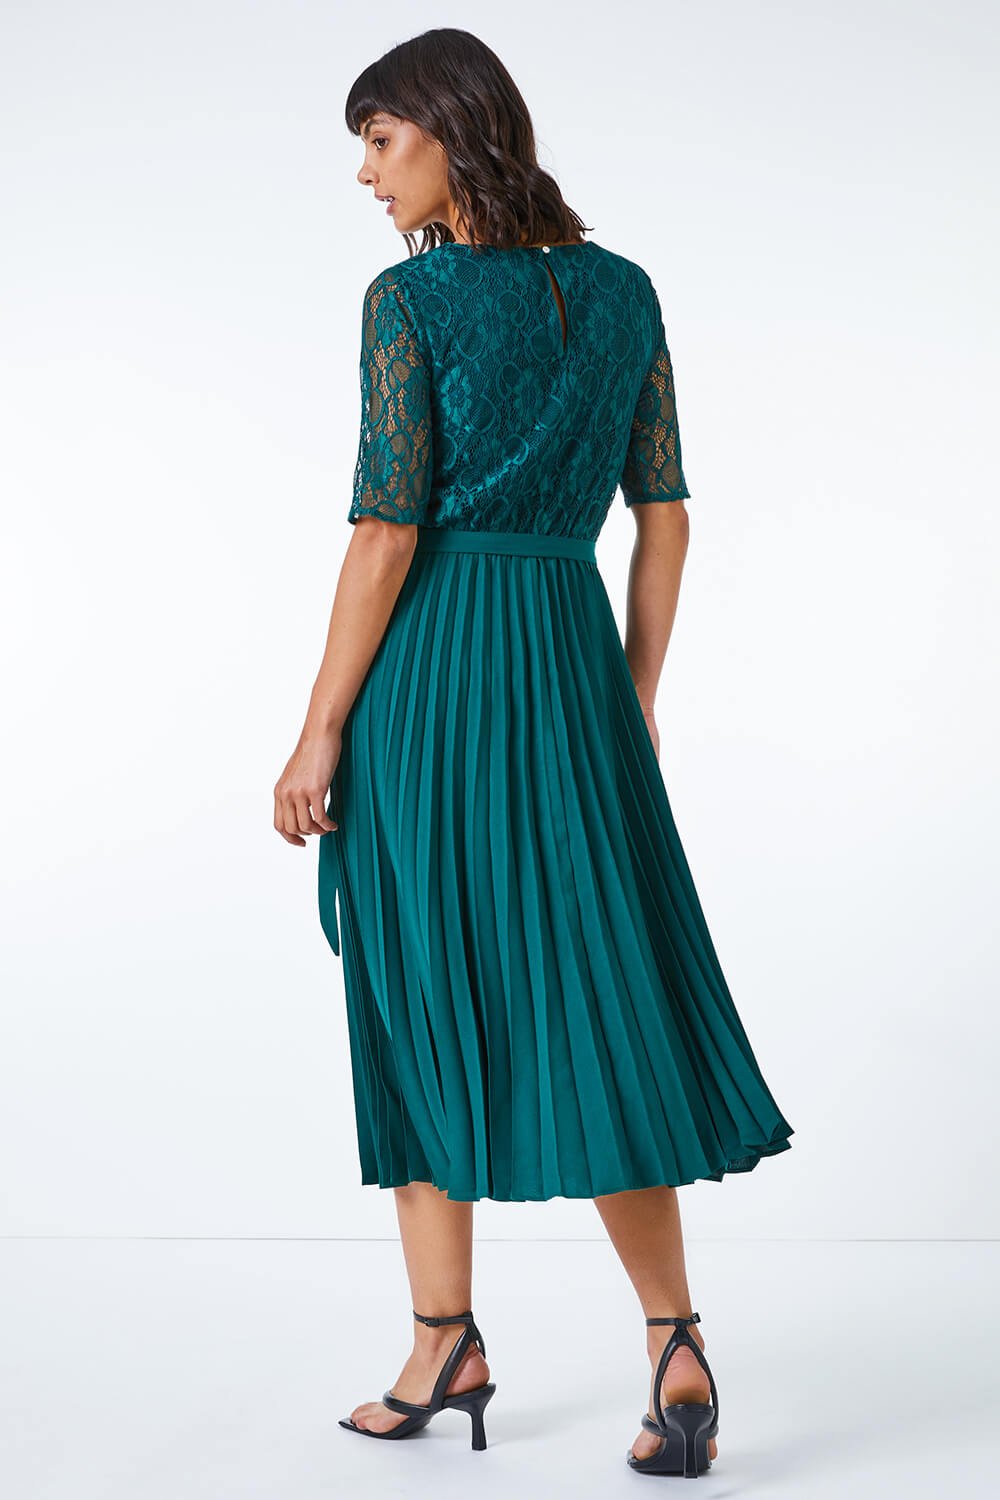 Green Lace Pleated Midi Dress, Image 3 of 5